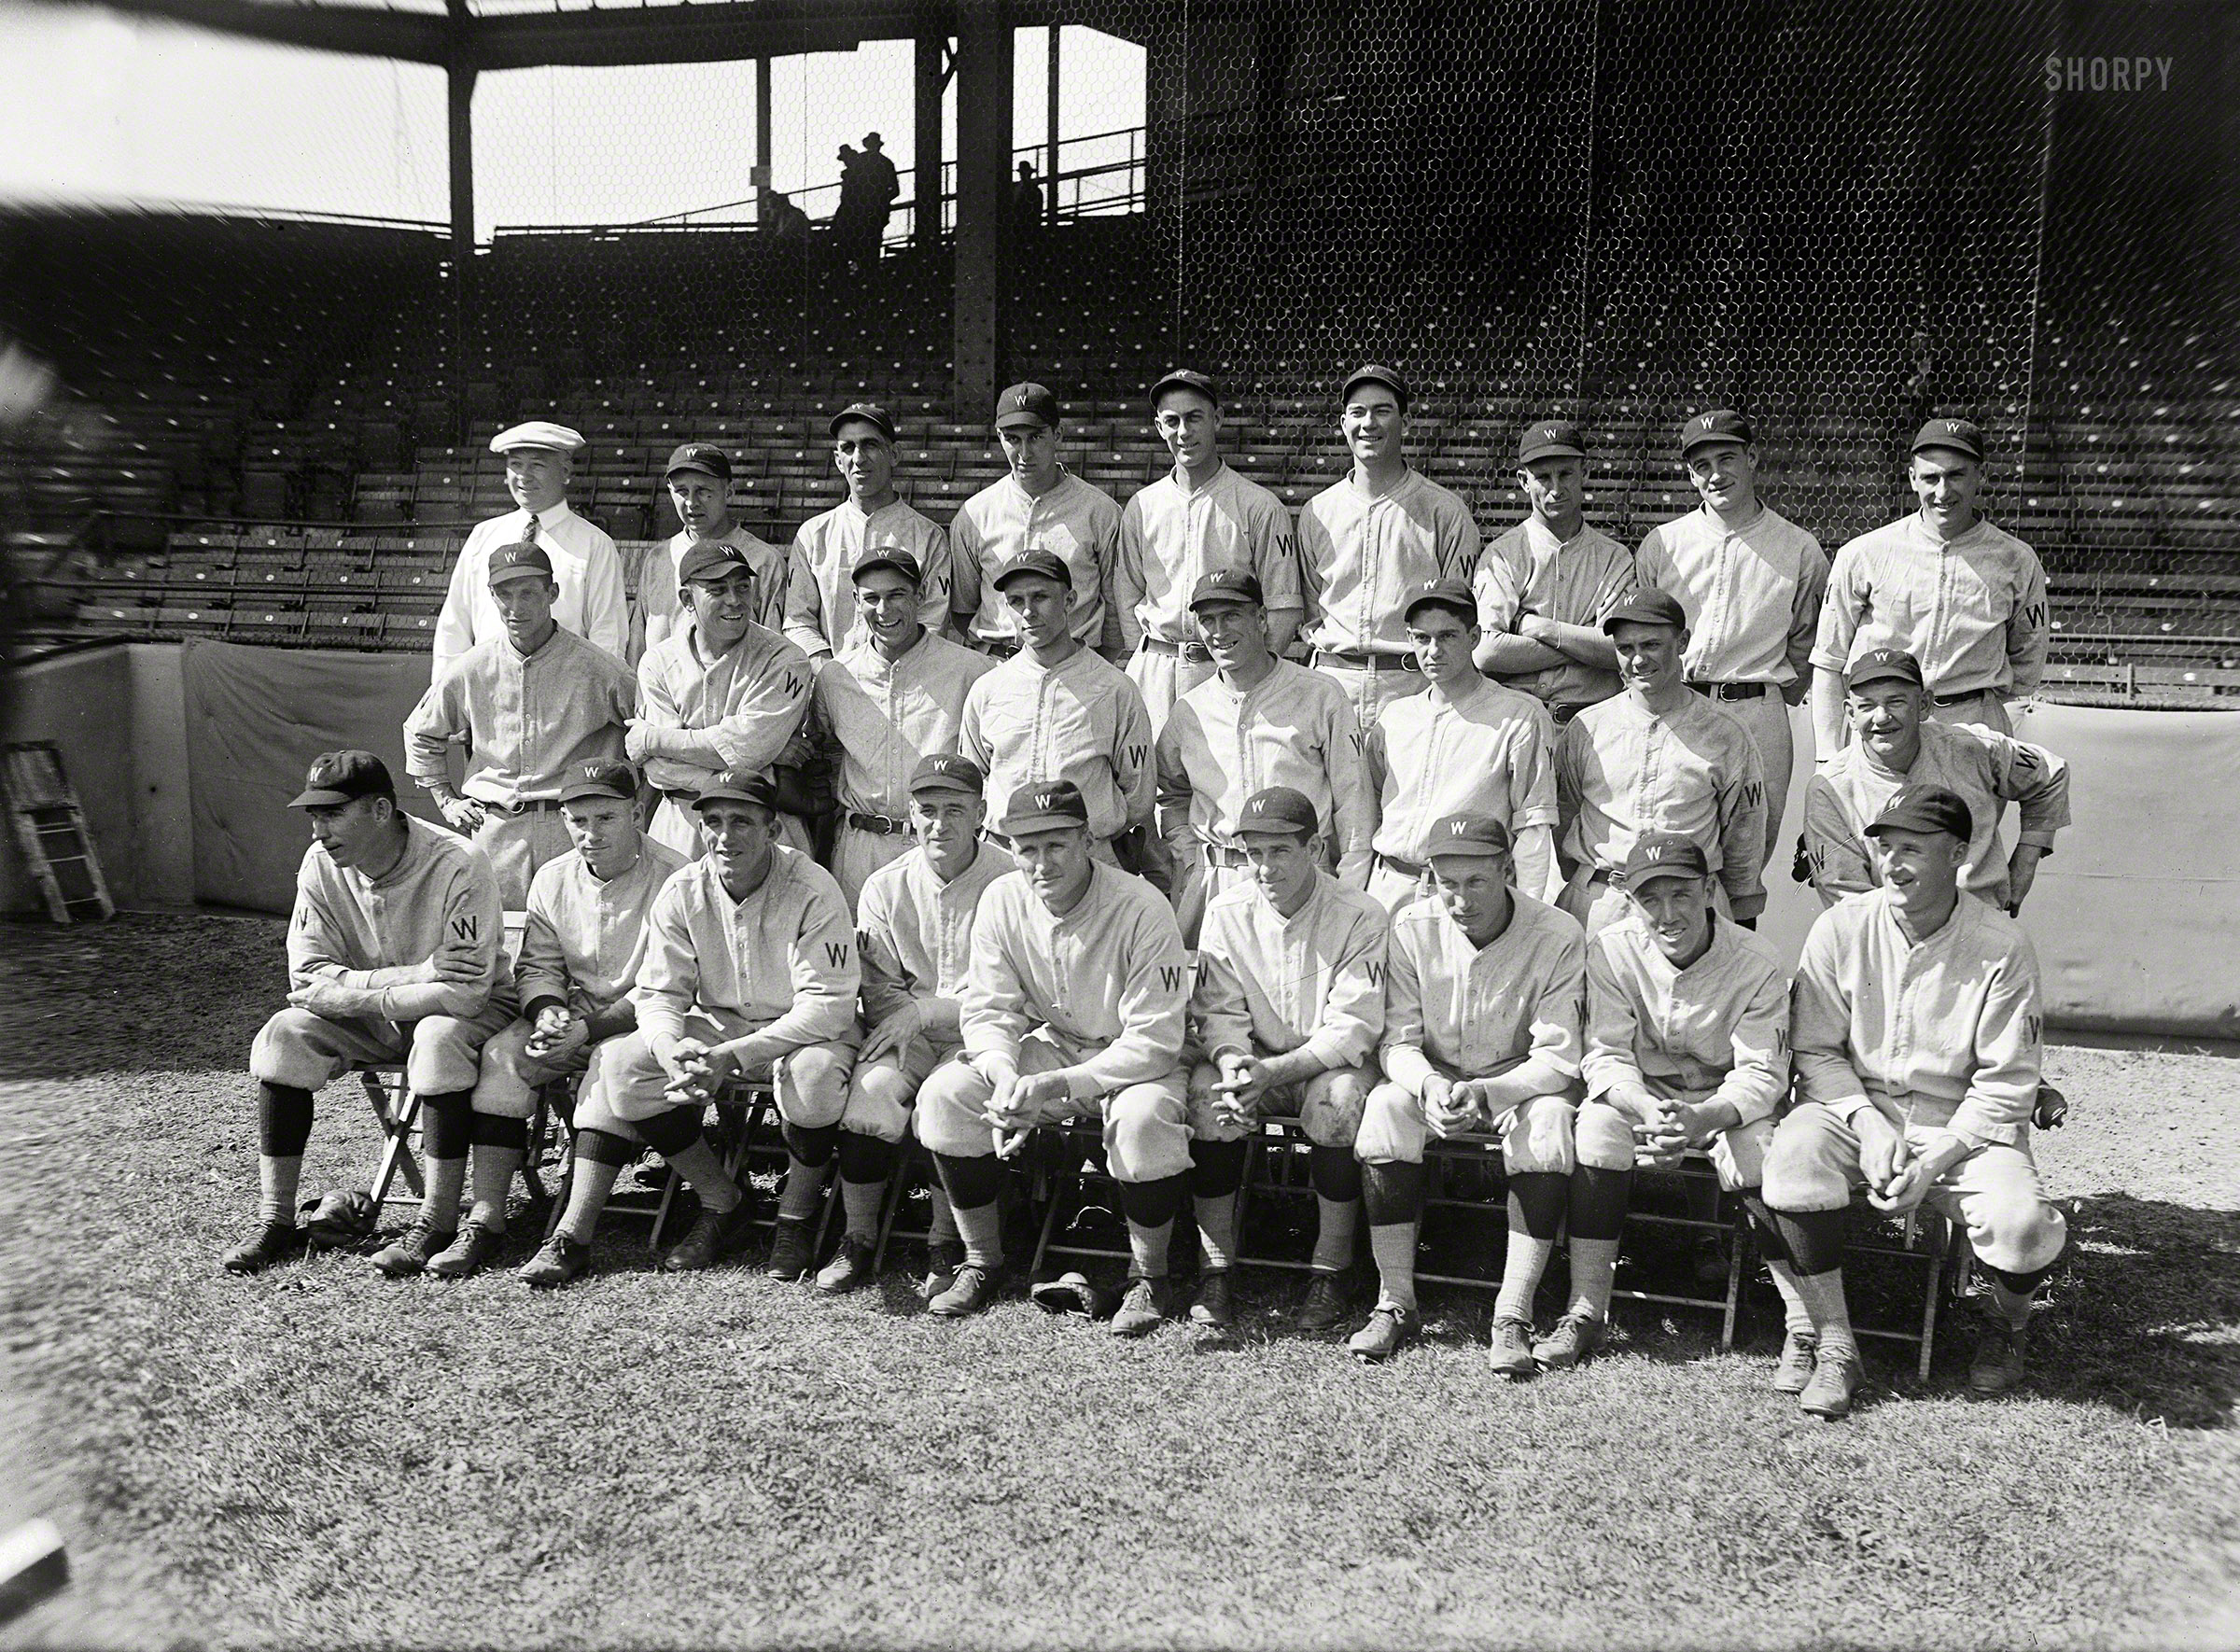 1924. "Washington baseball." The Nationals, a.k.a. the Senators, at Griffith Stadium. Harris & Ewing Collection glass negative. View full size.